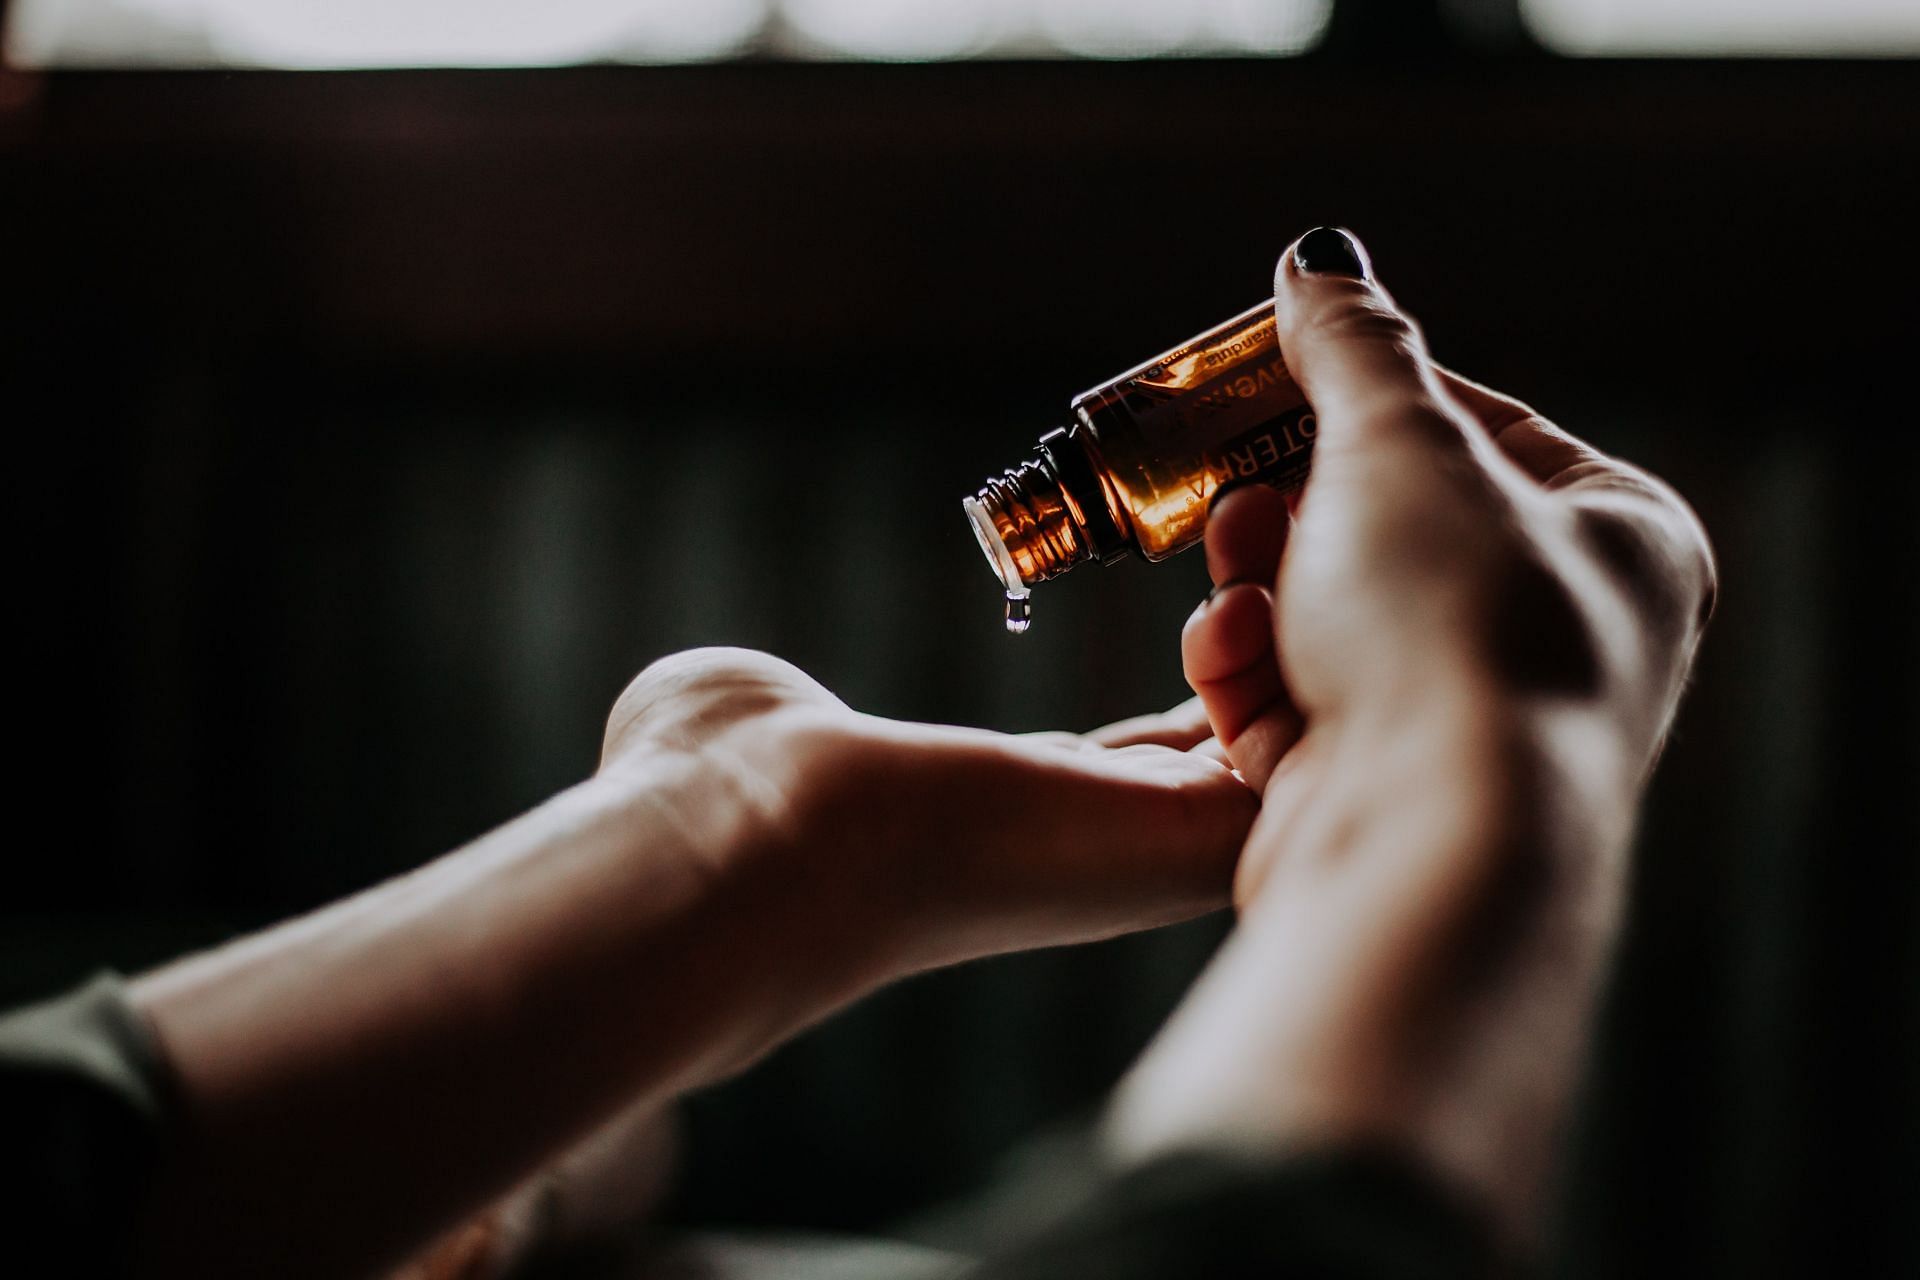 CeraVe is a new-age, exciting skincare brand. (Image via Unsplash/Christin Hume)